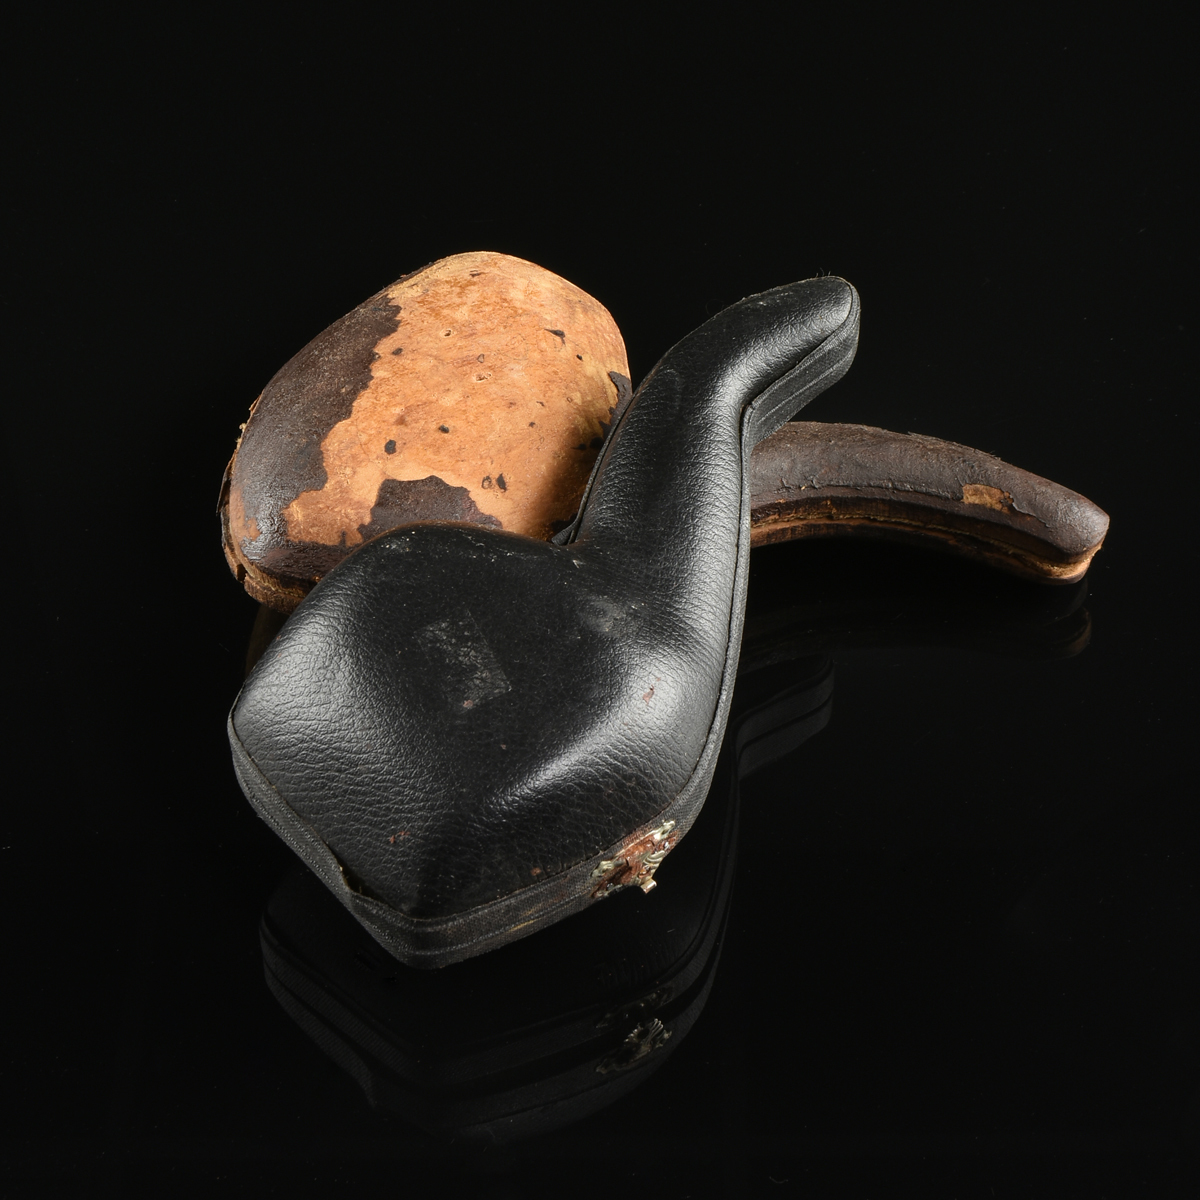 TWO MEERSCHAUM PORTRAIT TOBACCO PIPES, LATE 19TH/EARLY 20TH CENTURY, carved in the form of a - Image 9 of 9